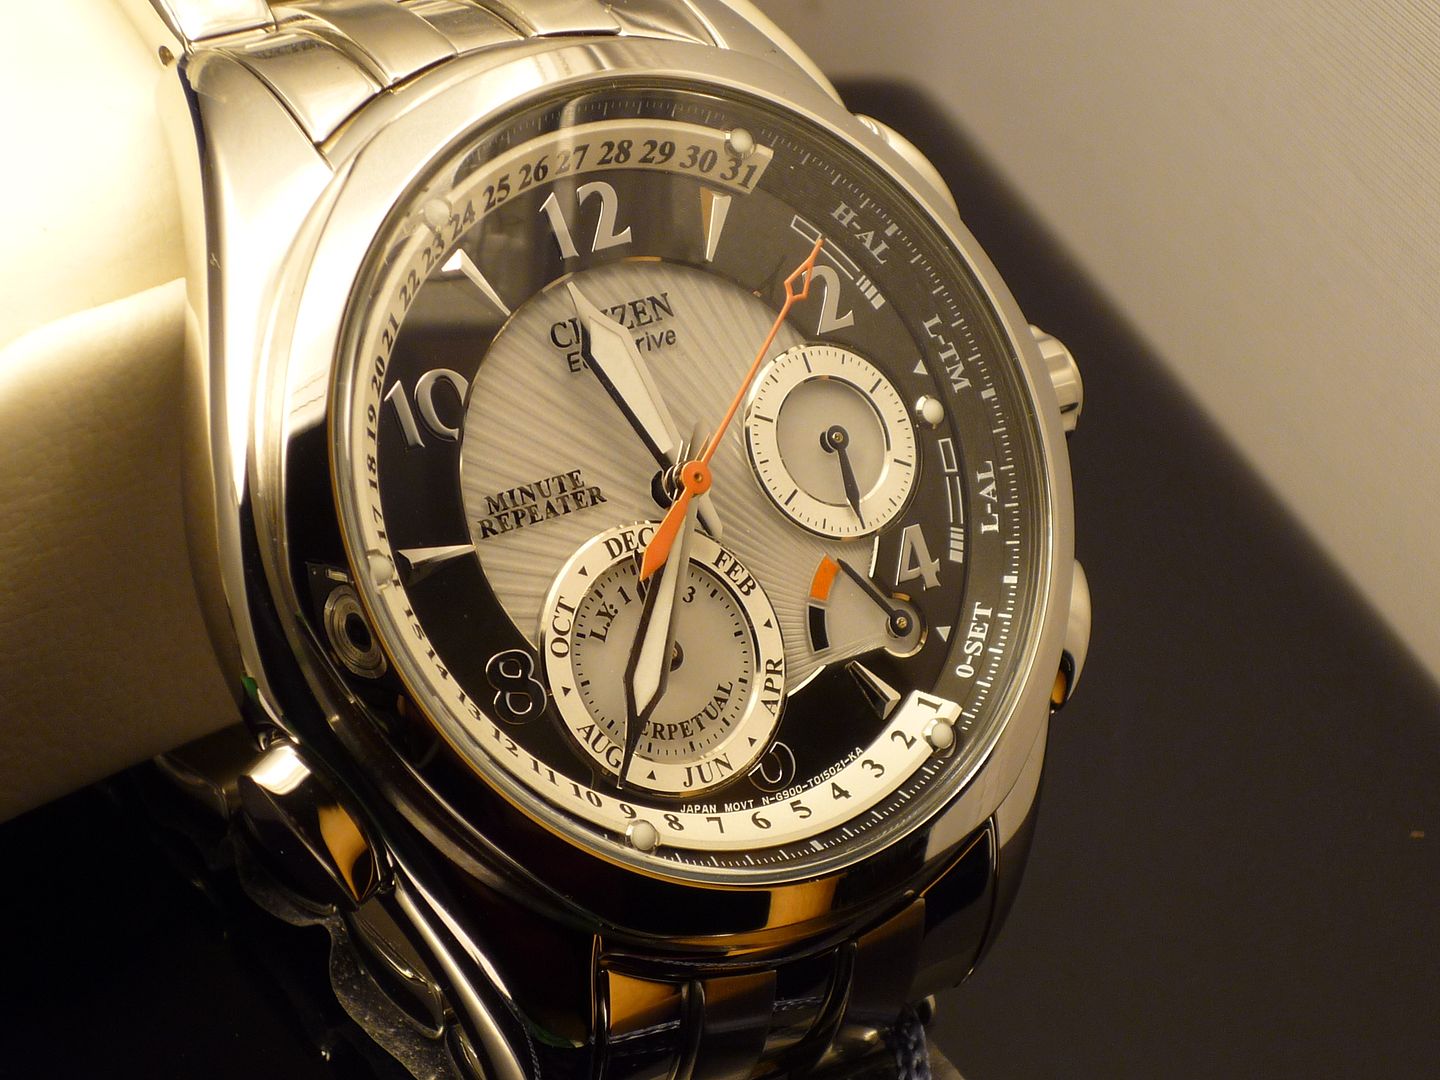 Details about Citizen Mens Minute Repeater Calibre 9000 Stainless ...